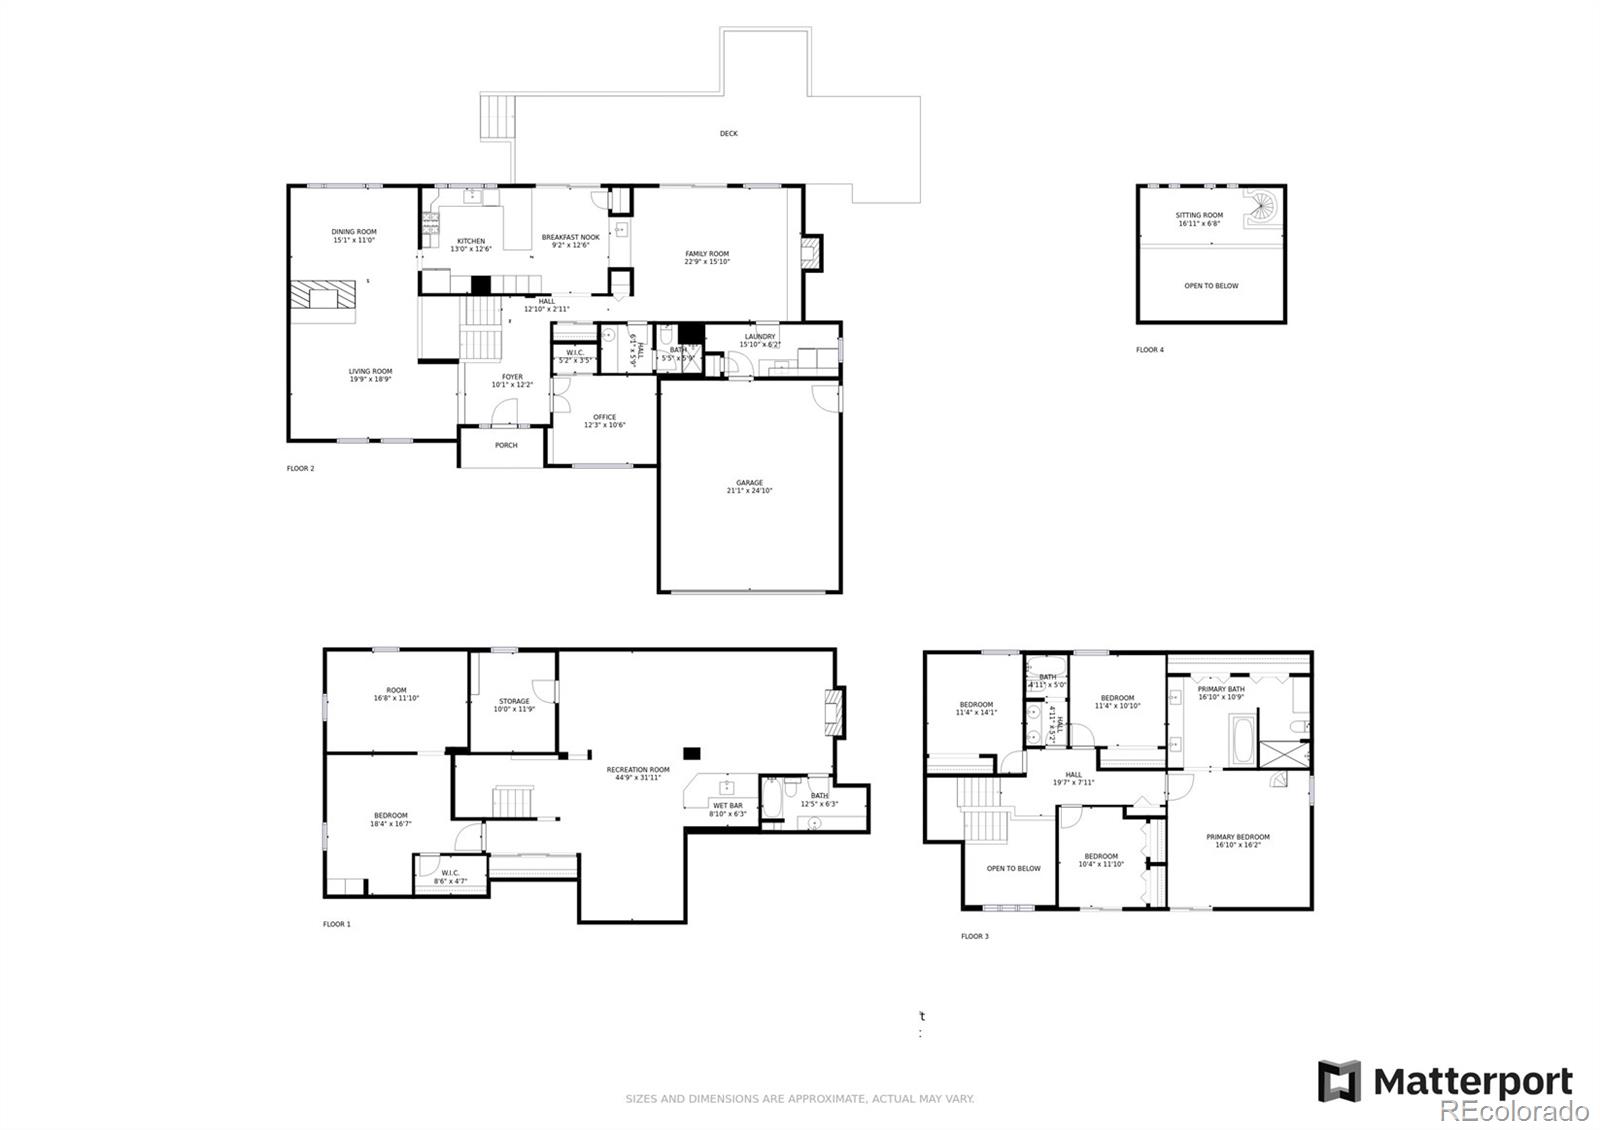 7884 Silverweed, Lone Tree, CO